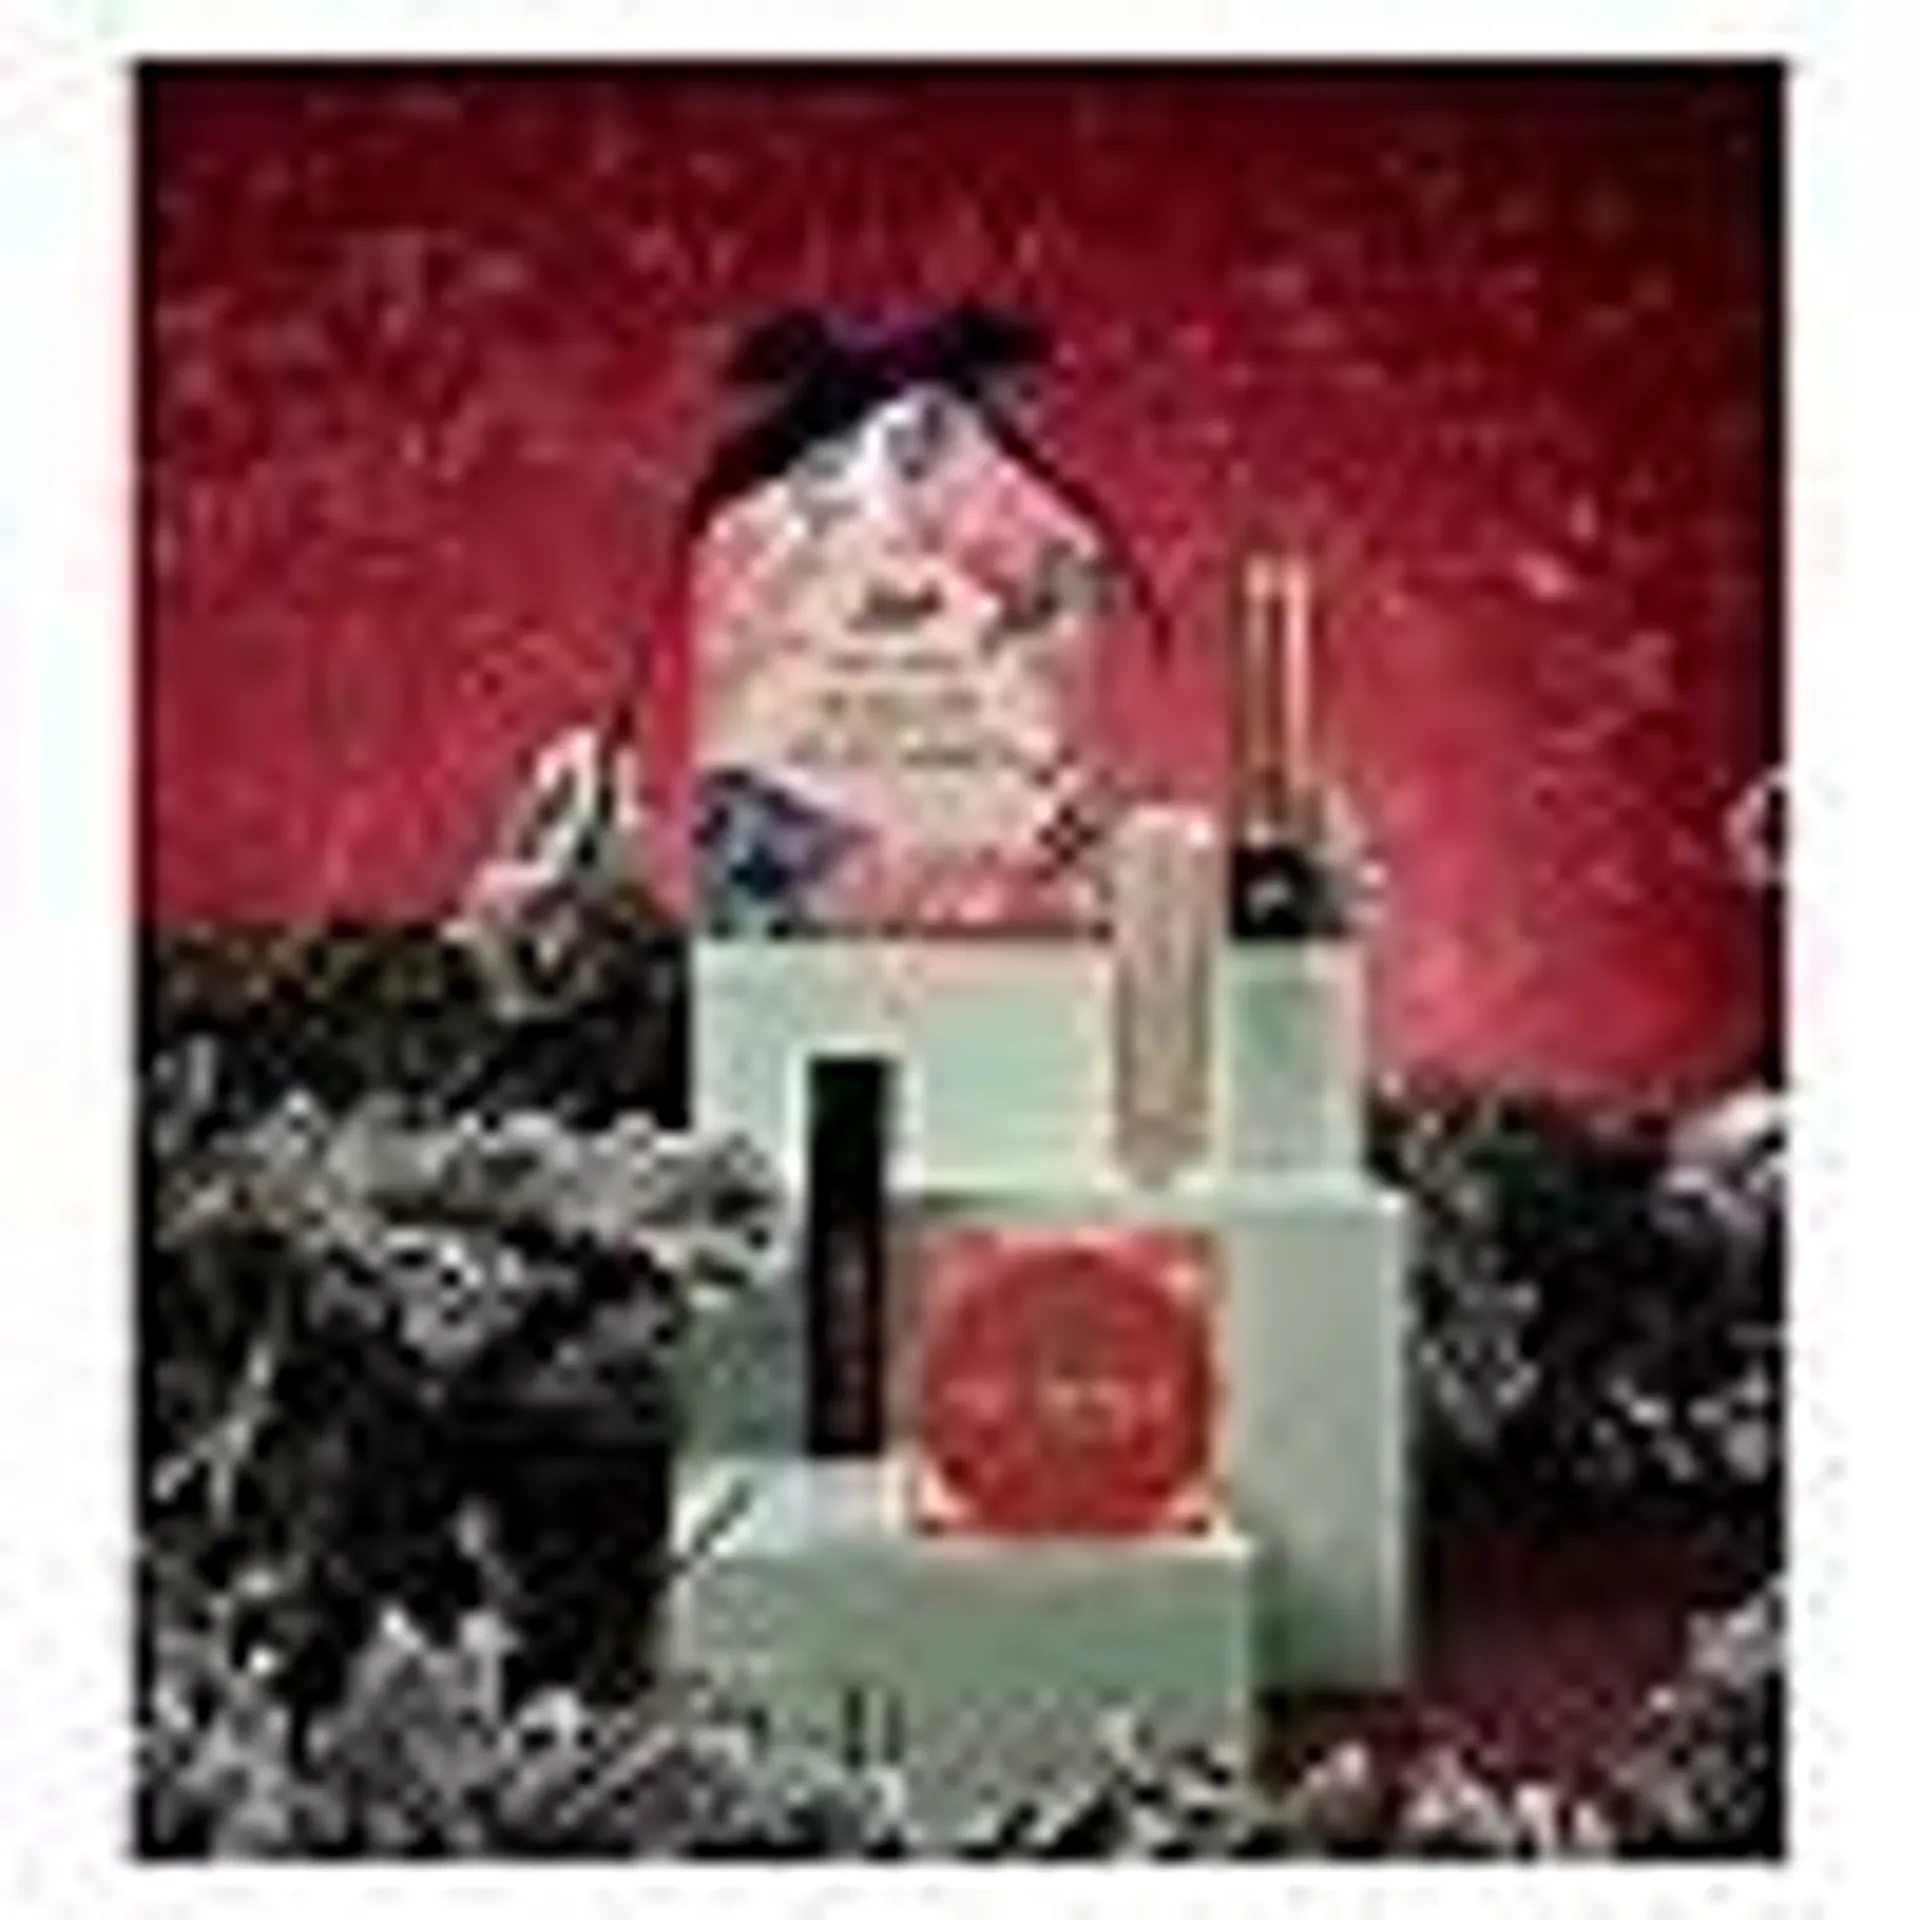 Boots Premium Beauty Christmas Bauble - Makeup Must Haves - Limited Edition